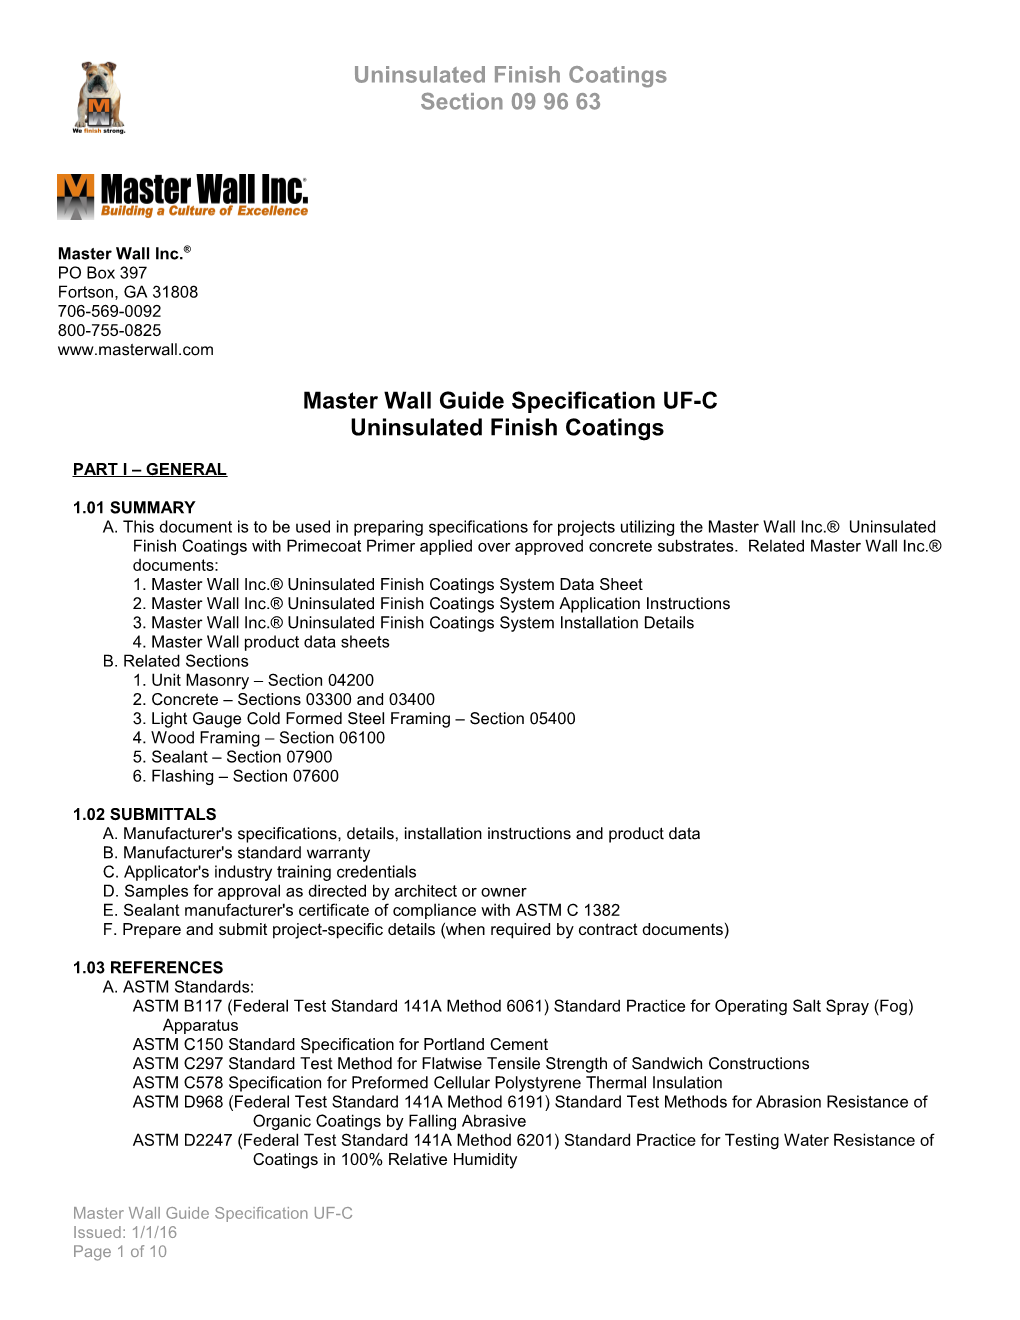 Master Wall Guide Specification UF-C